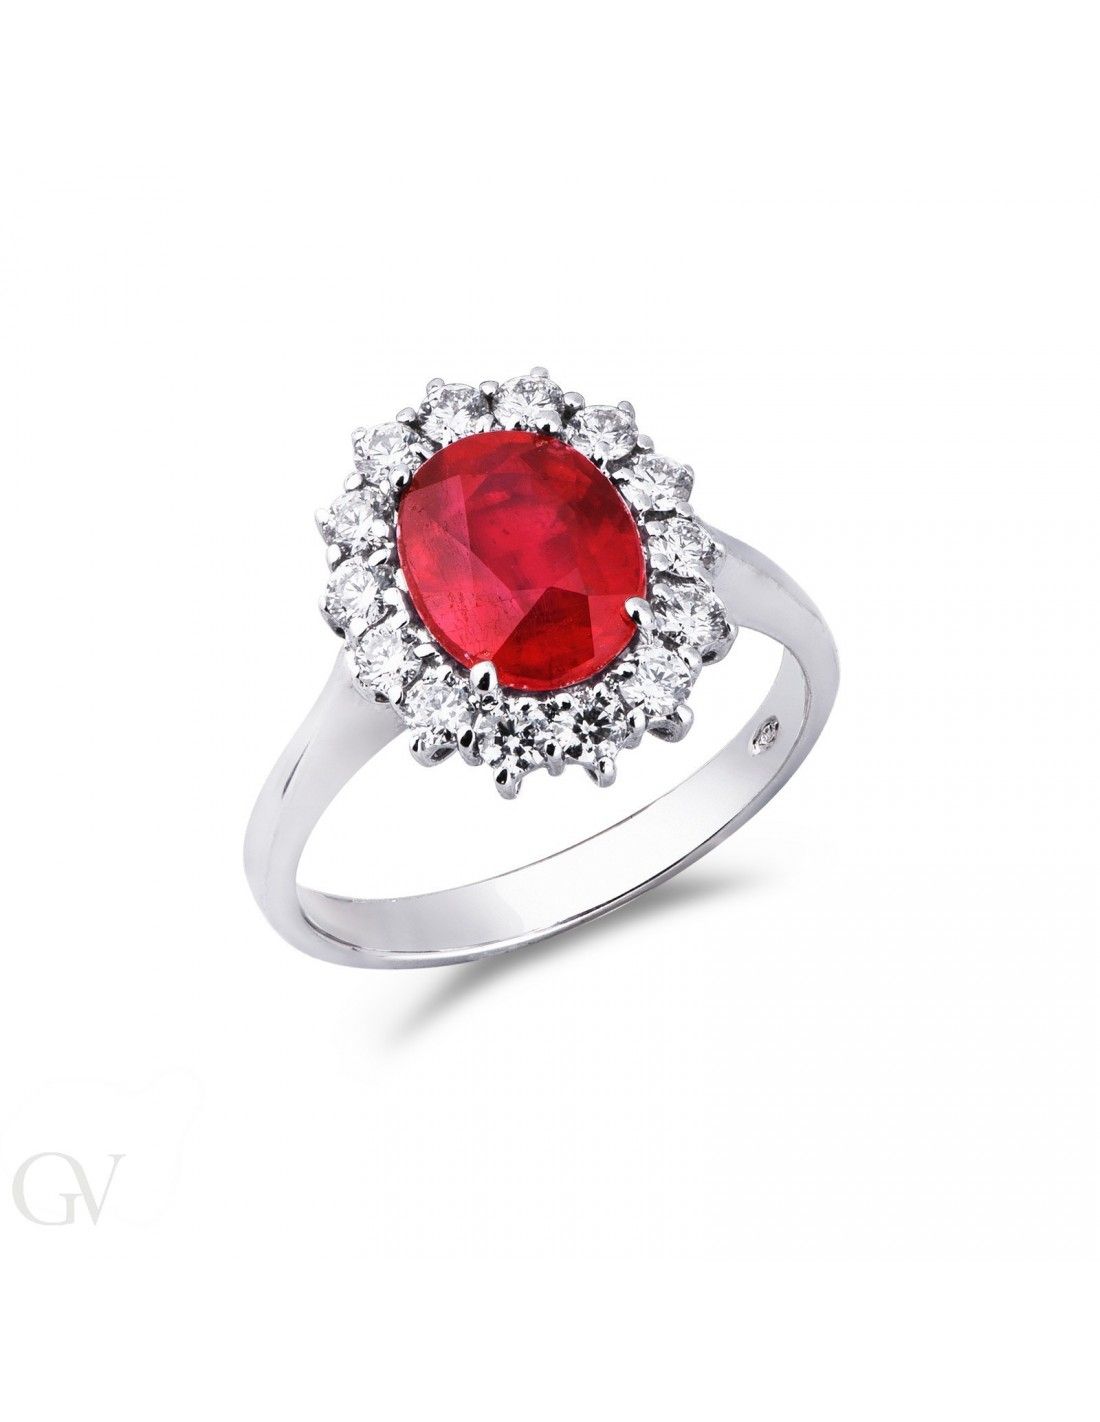 Diamond Halo Ring White Gold 18k With Ruby Oval Cut Measure 14 Regarding Ruby Halo Rings (View 3 of 25)